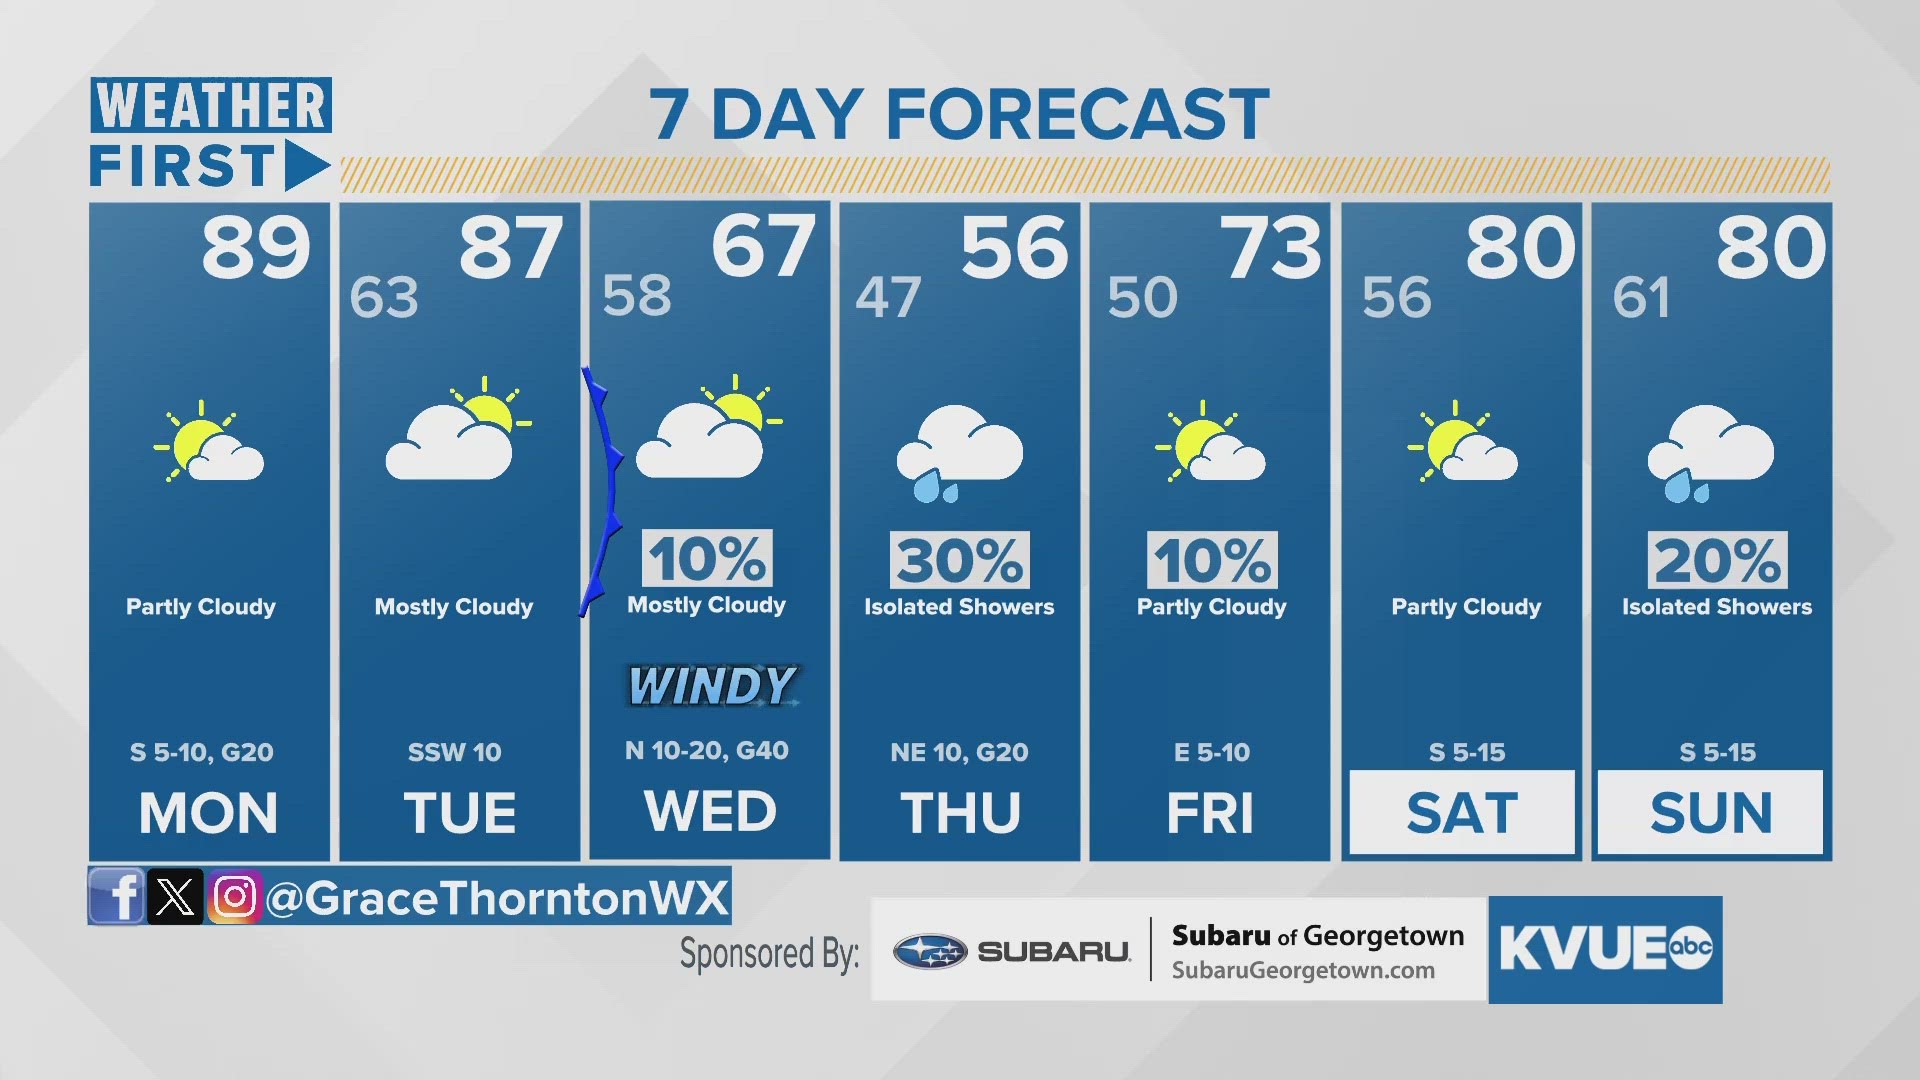 Temperatures are on a roller coast this week, with slight chances for rain in between.